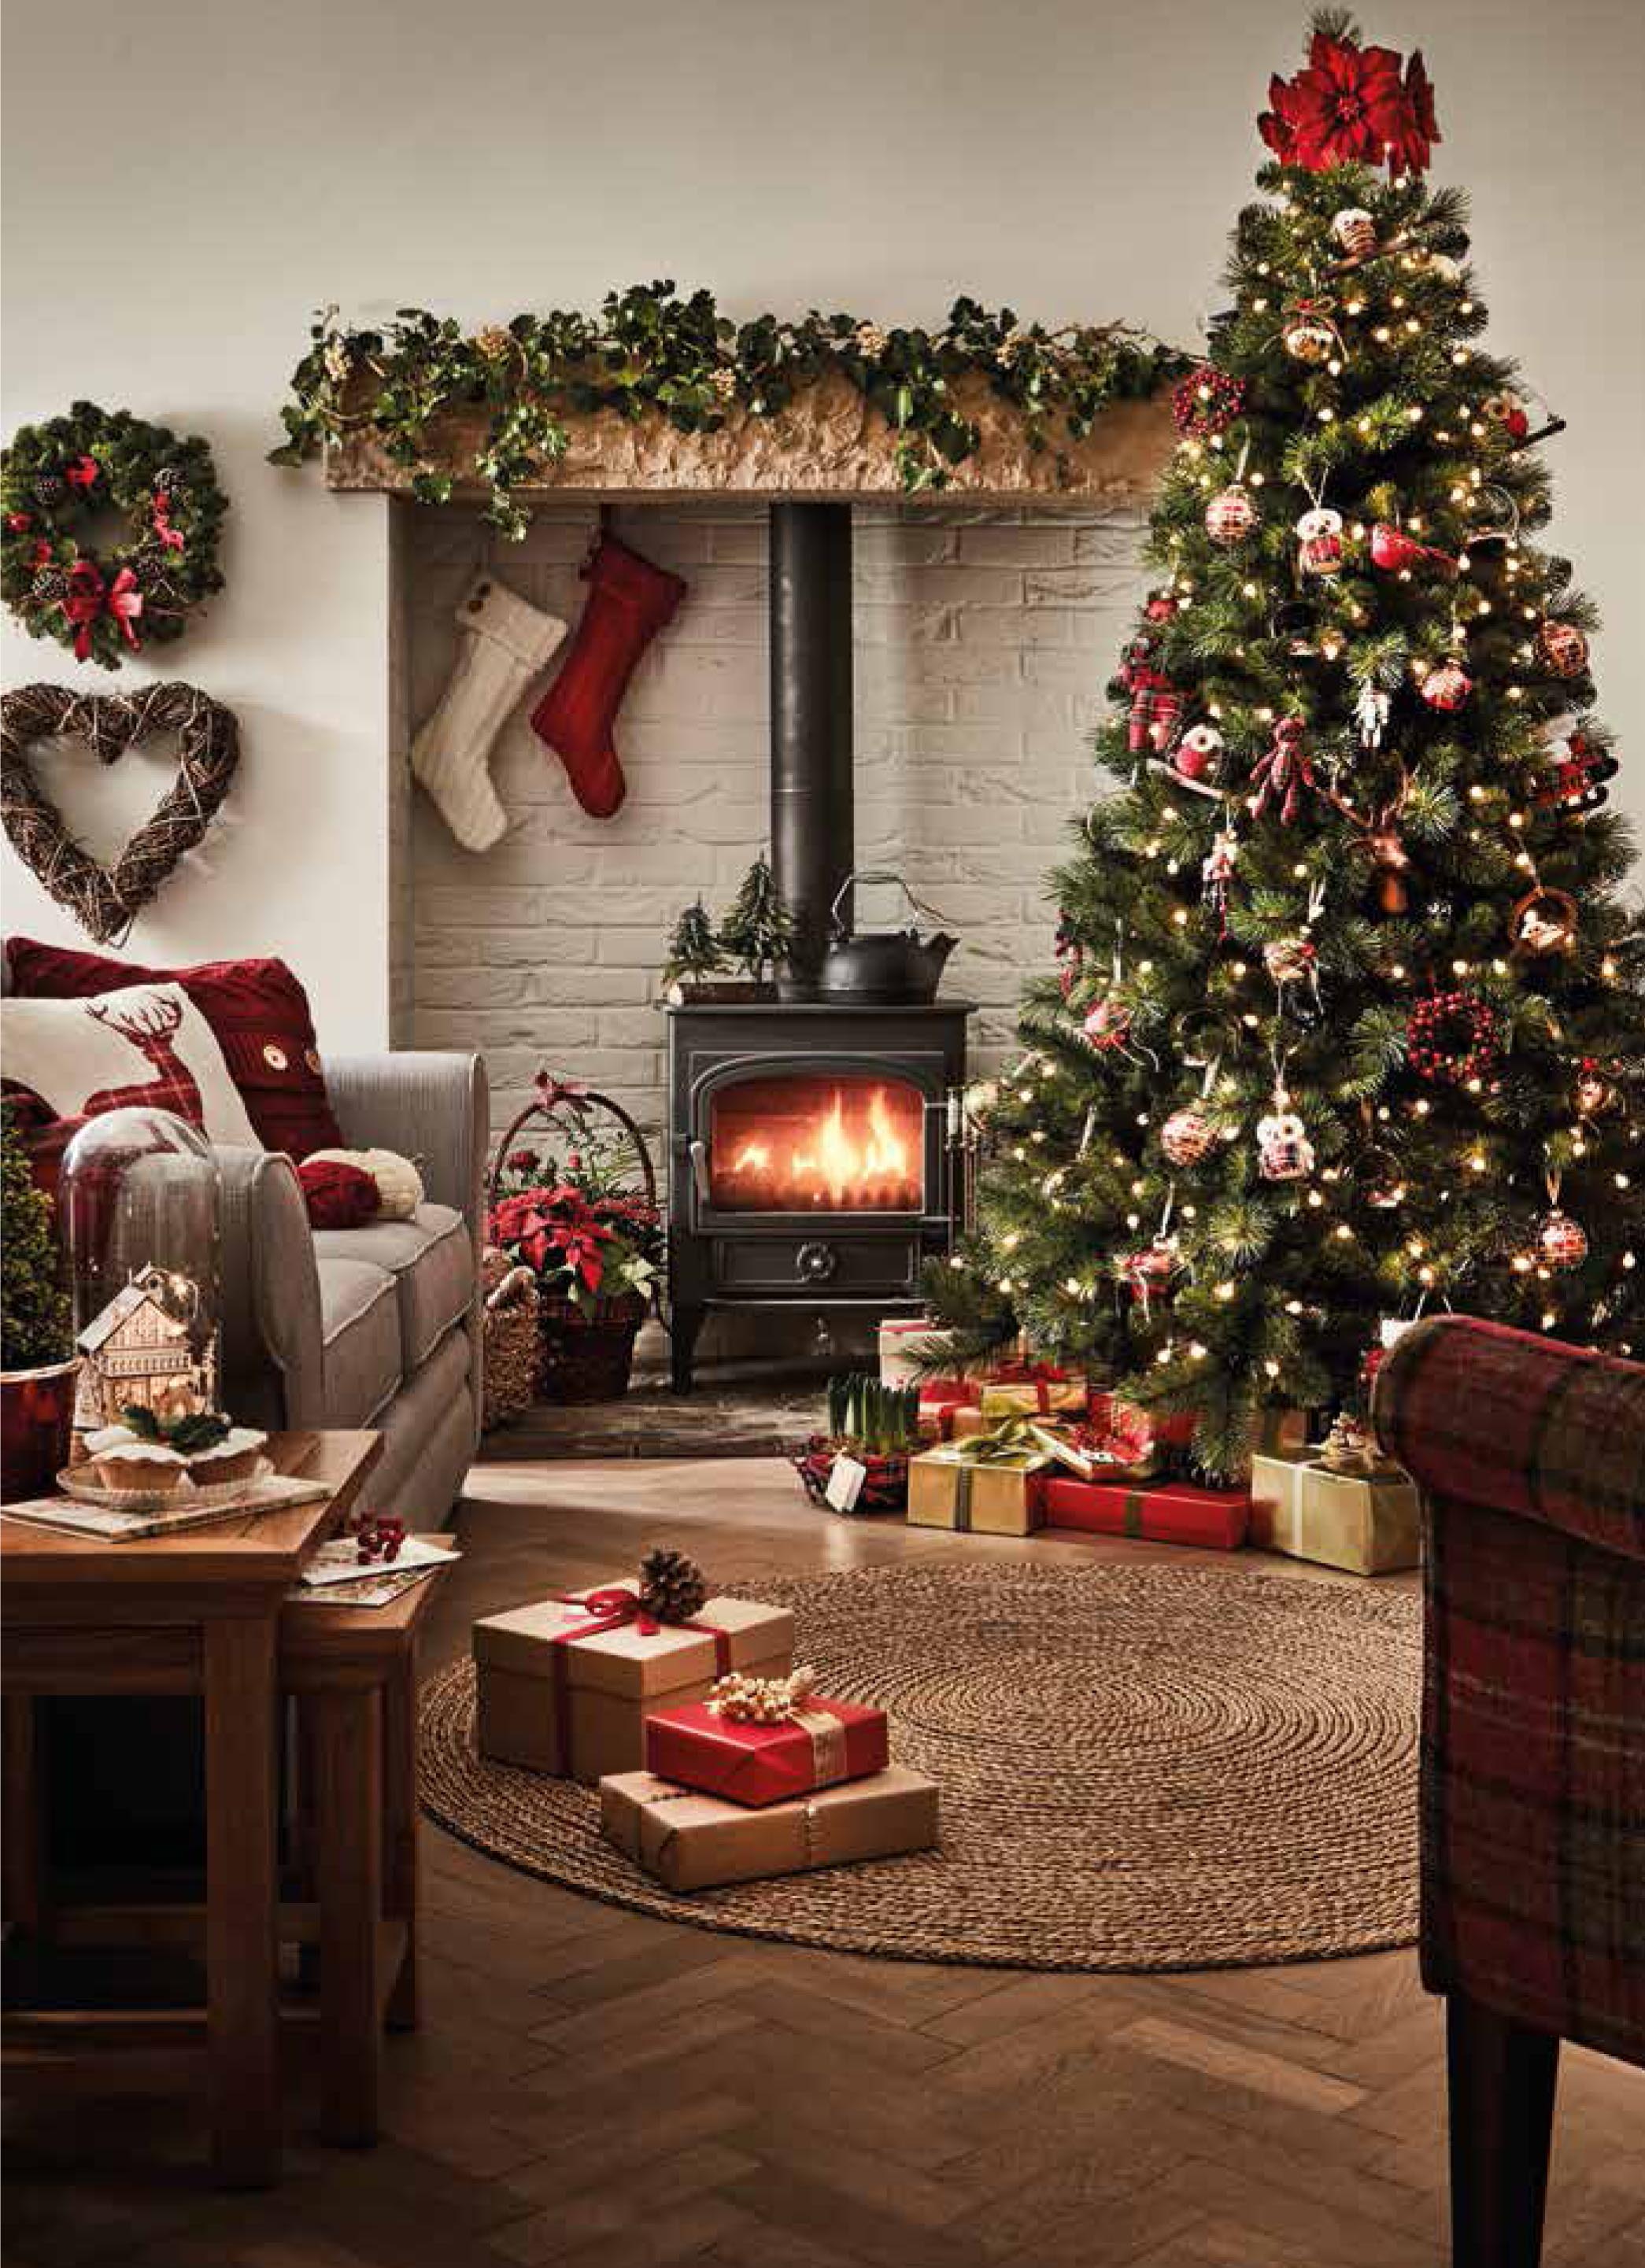 Christmas decorations can create a winter wonderland at home - Scotsman